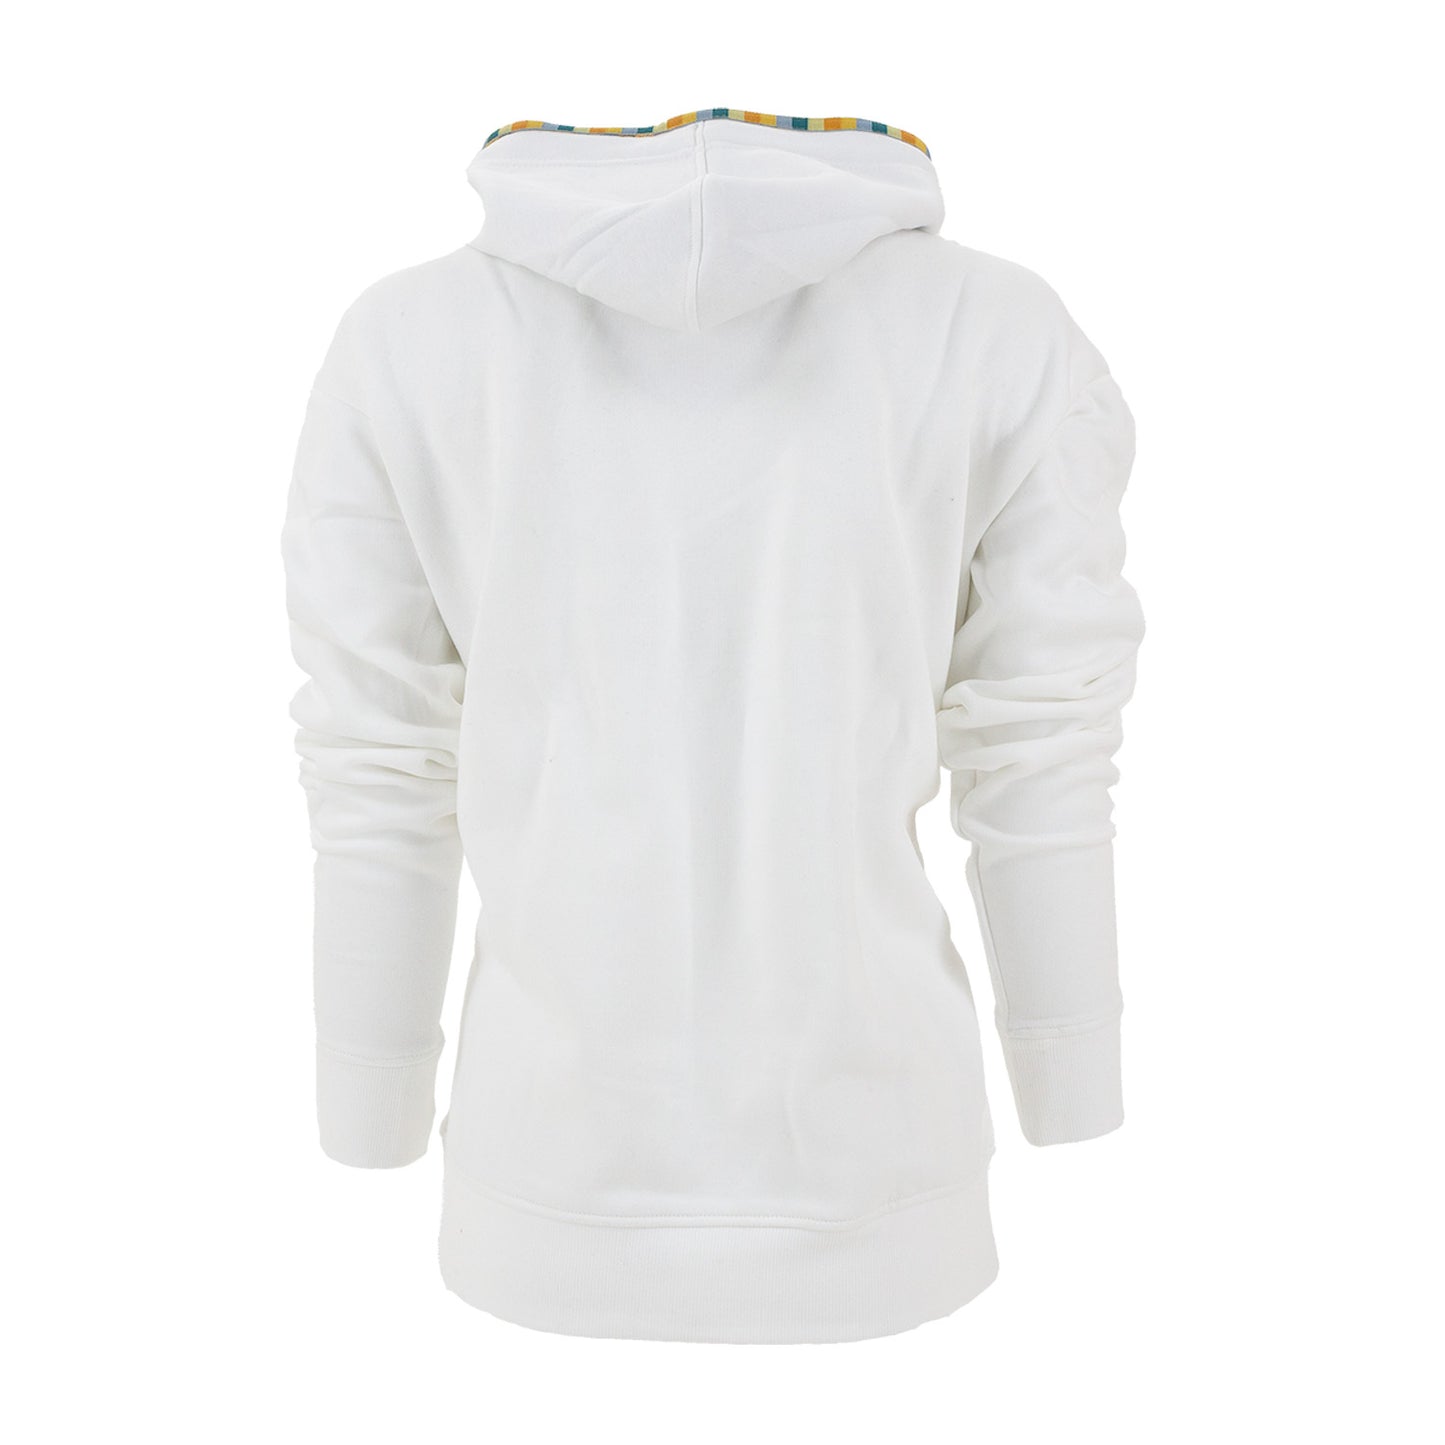 Mango Cart Signature Collection - Womens Iconic Hoodie (White)